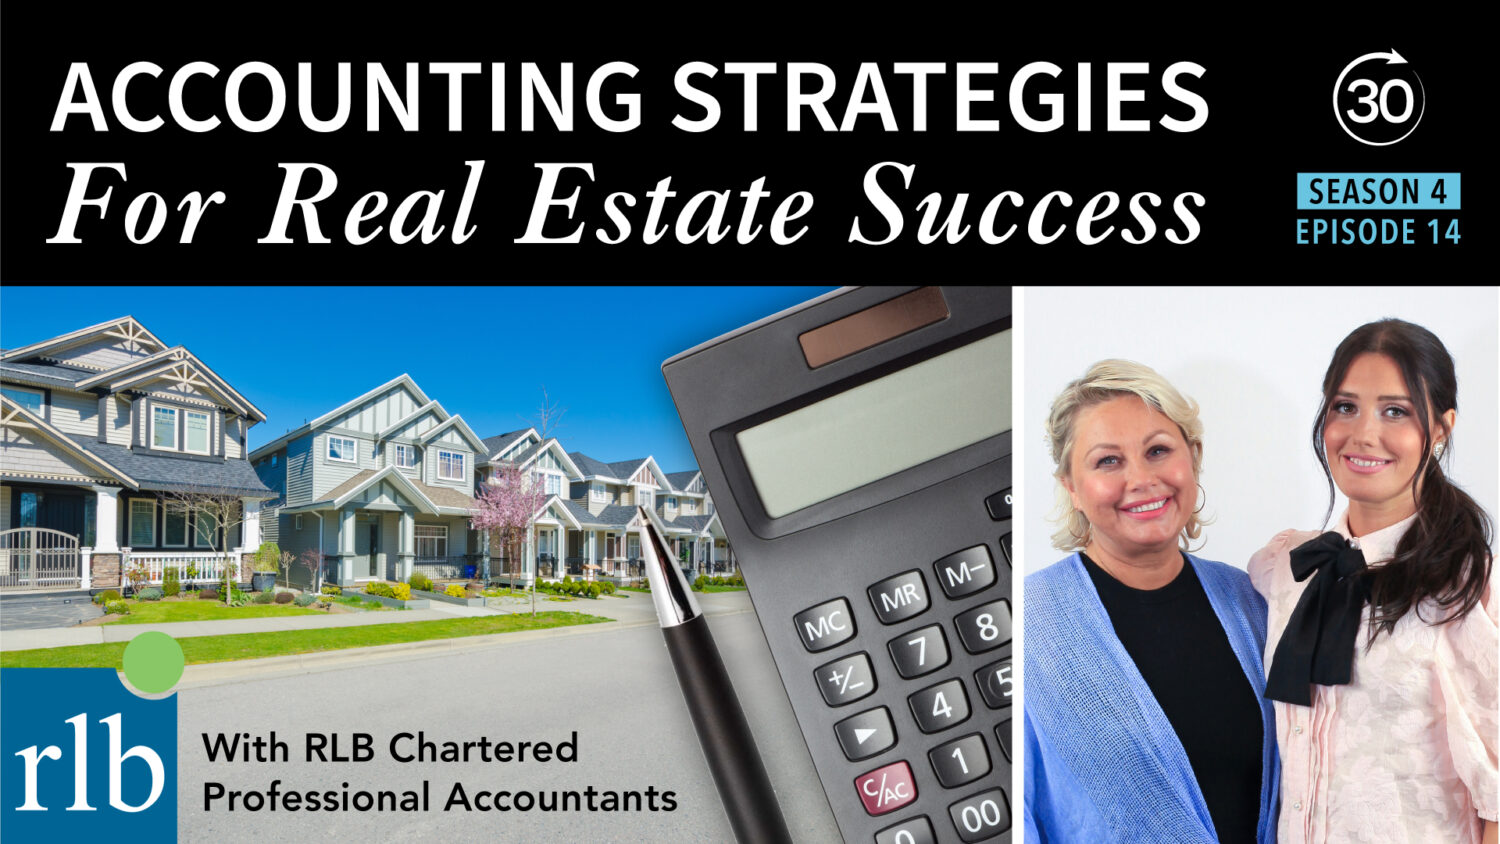 S4 E14 - Accounting Strategies for Real Estate Success